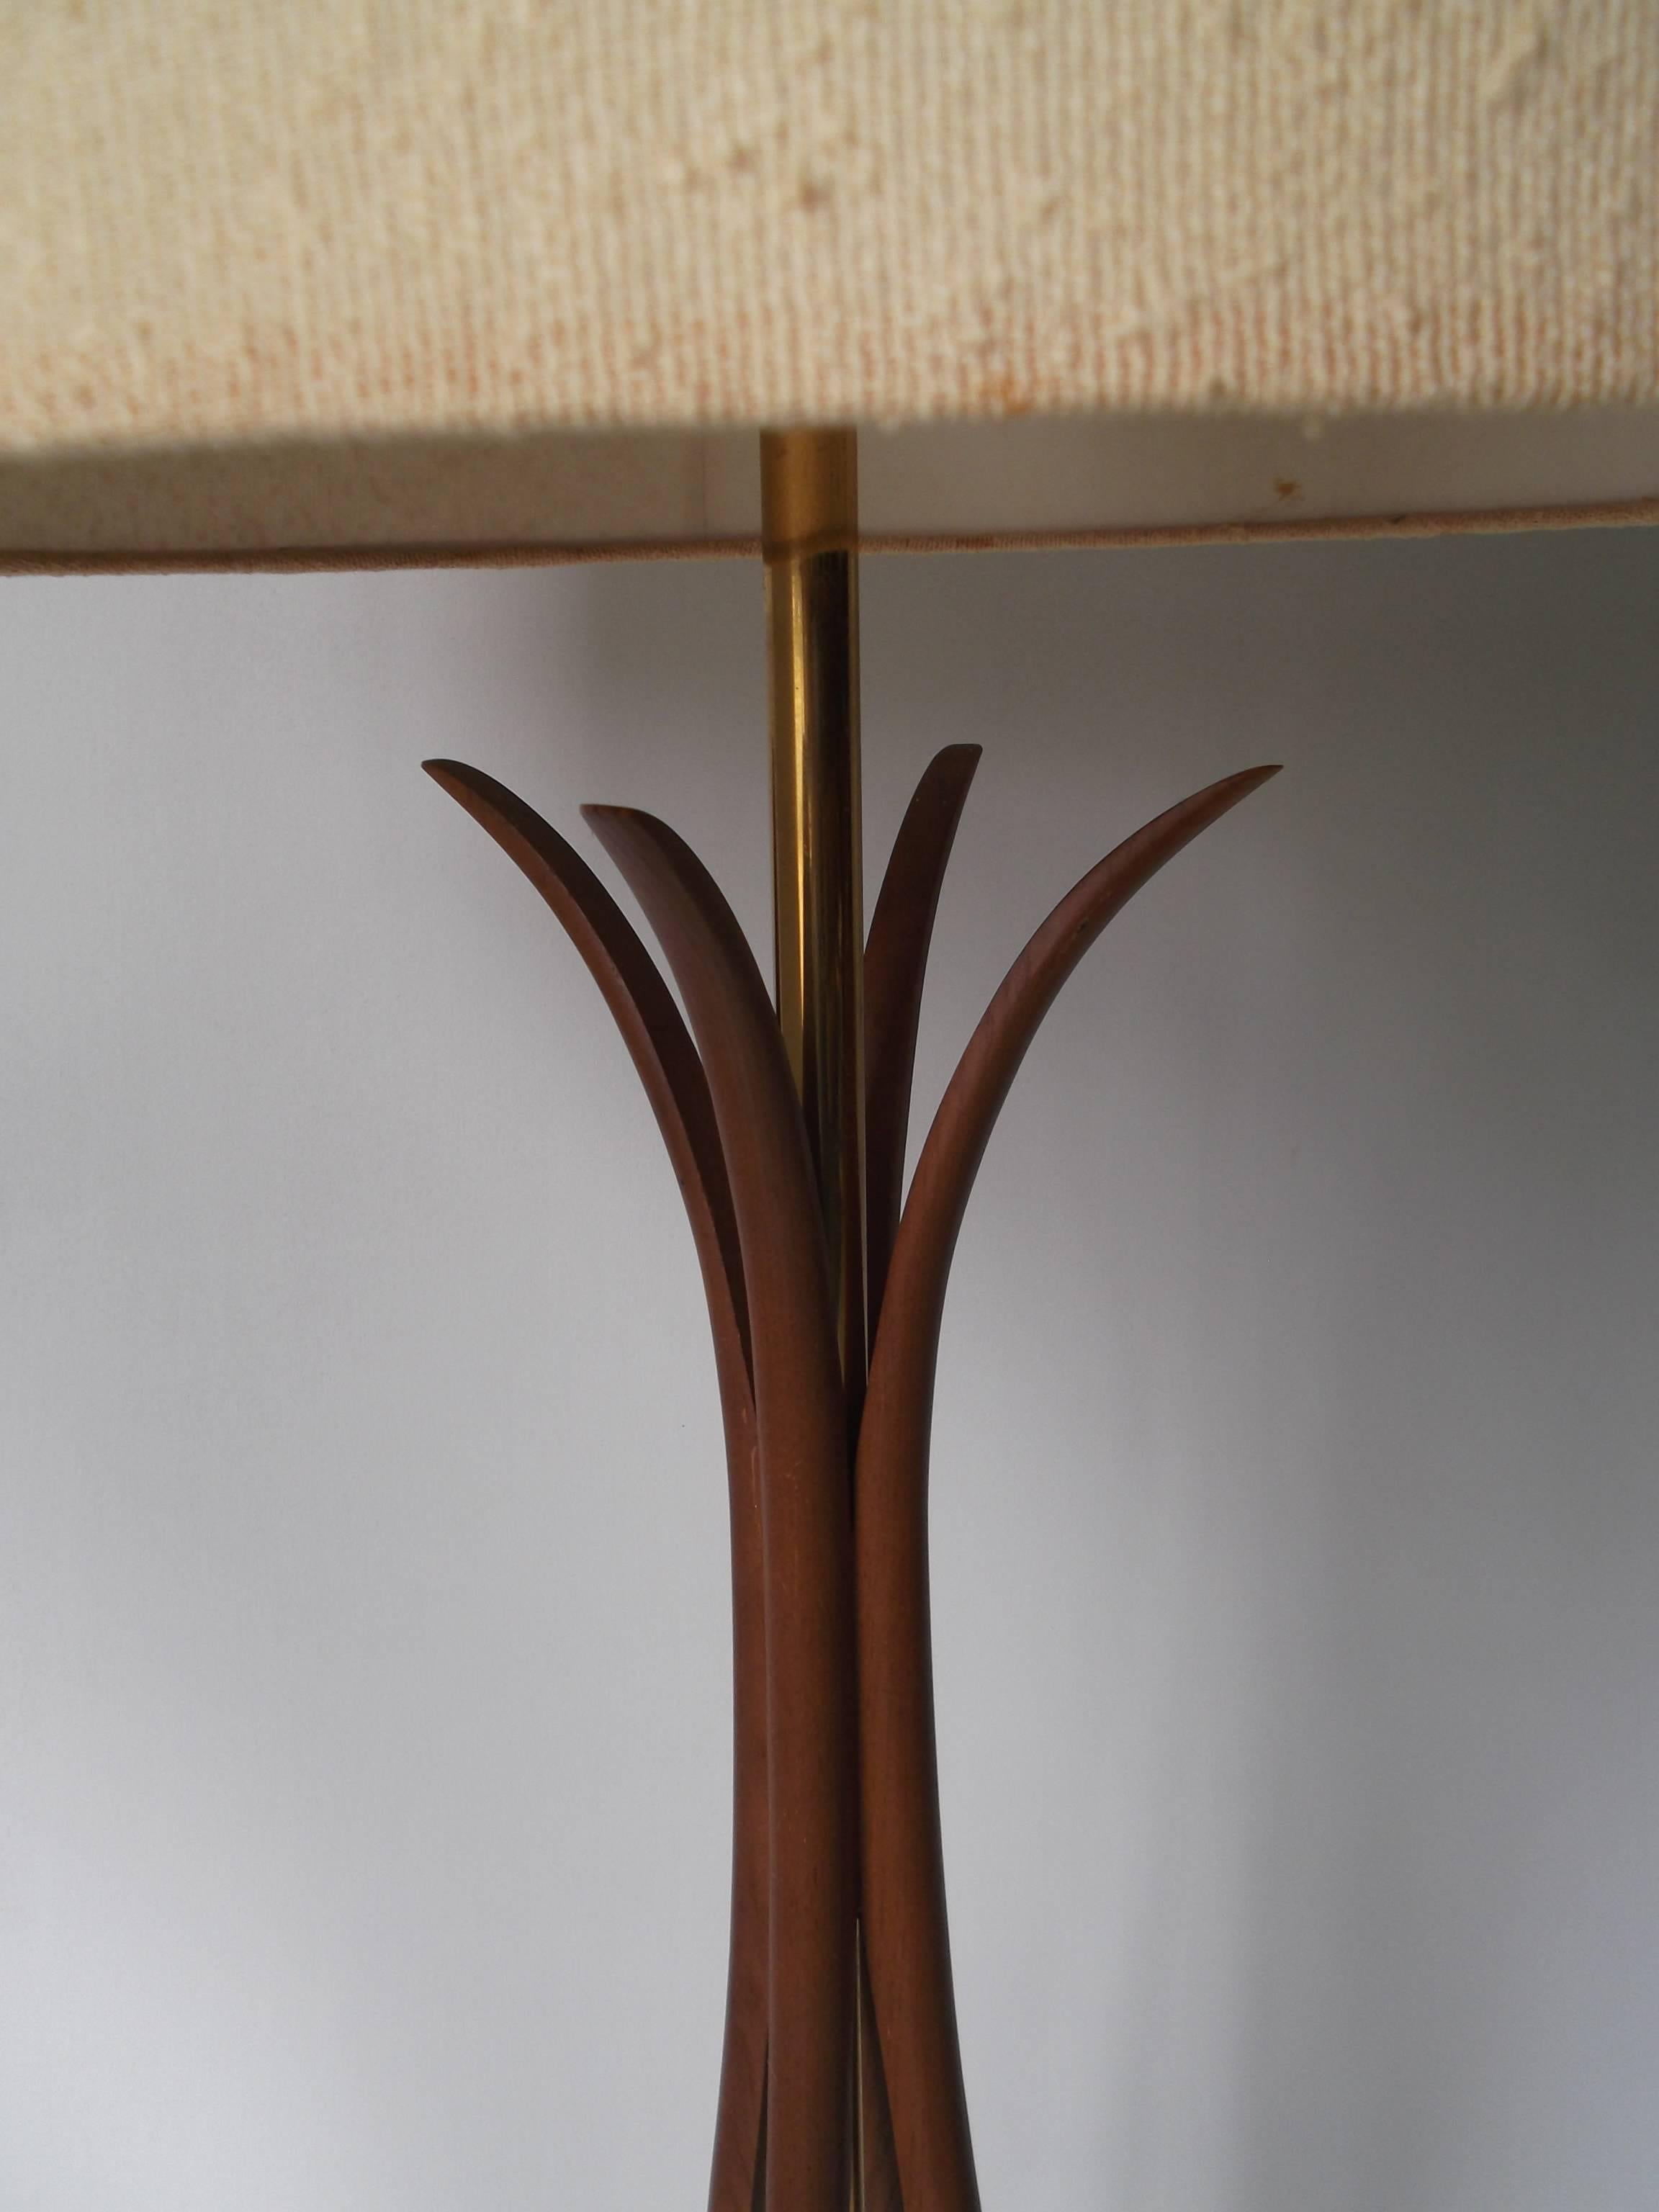 This is a nice vintage 1950s original, floor lamp by Rembrandt. It has a label to metal socket. It features four walnut Danish modern style curvy tapering ribs. There is a glass shade up light for the orig. shade to rest on. Base has minor wear